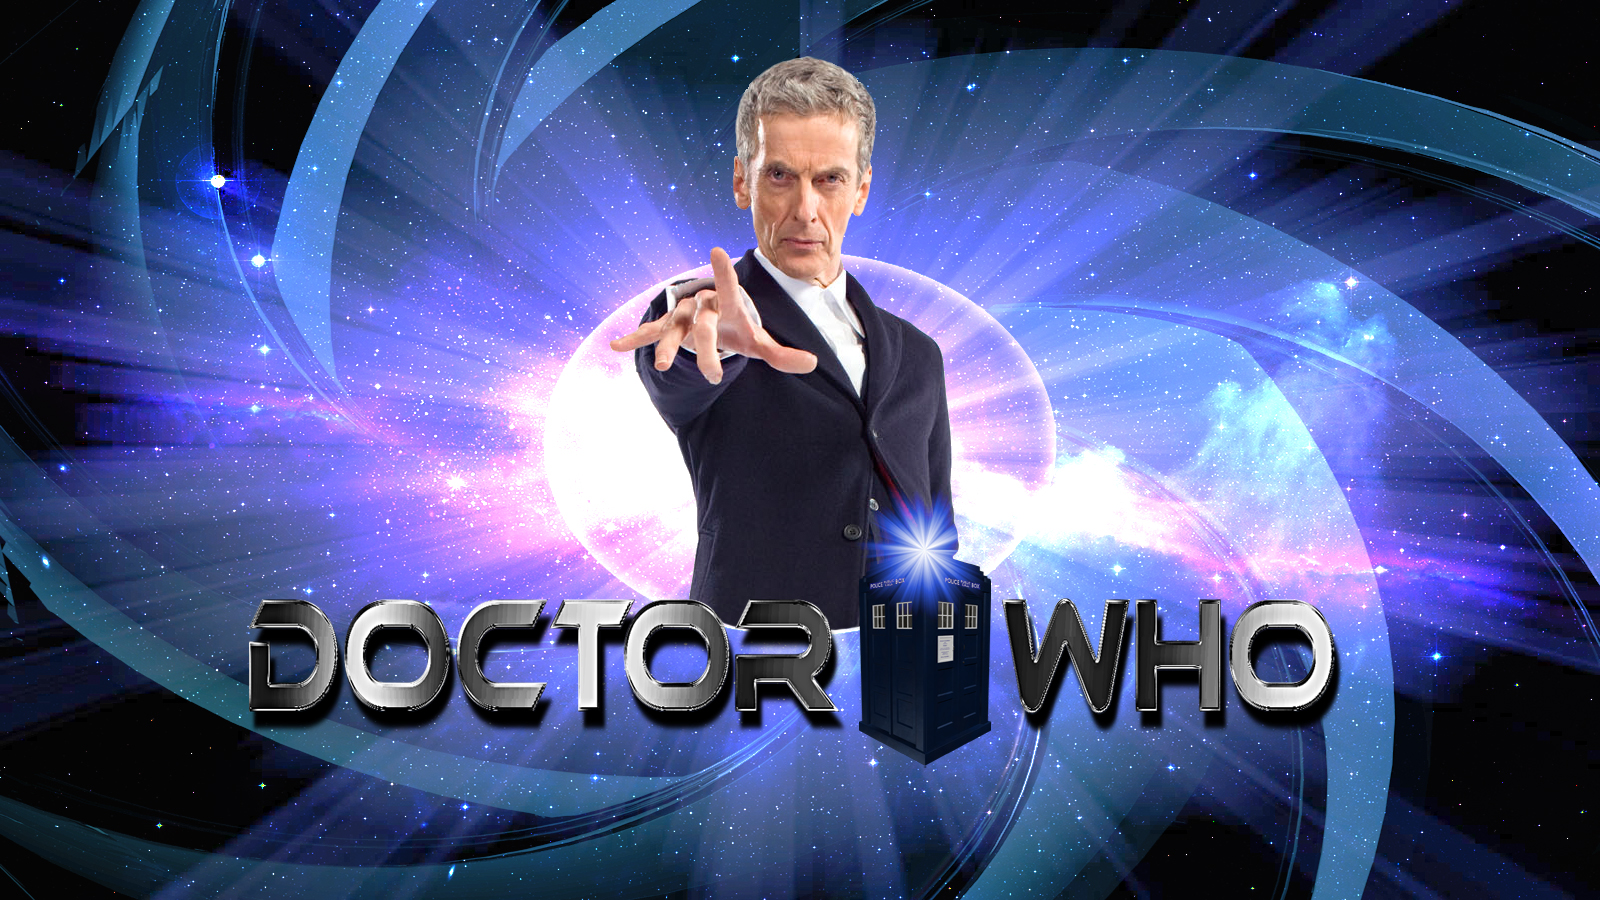 The 12th Doctor wp by SWFan1977